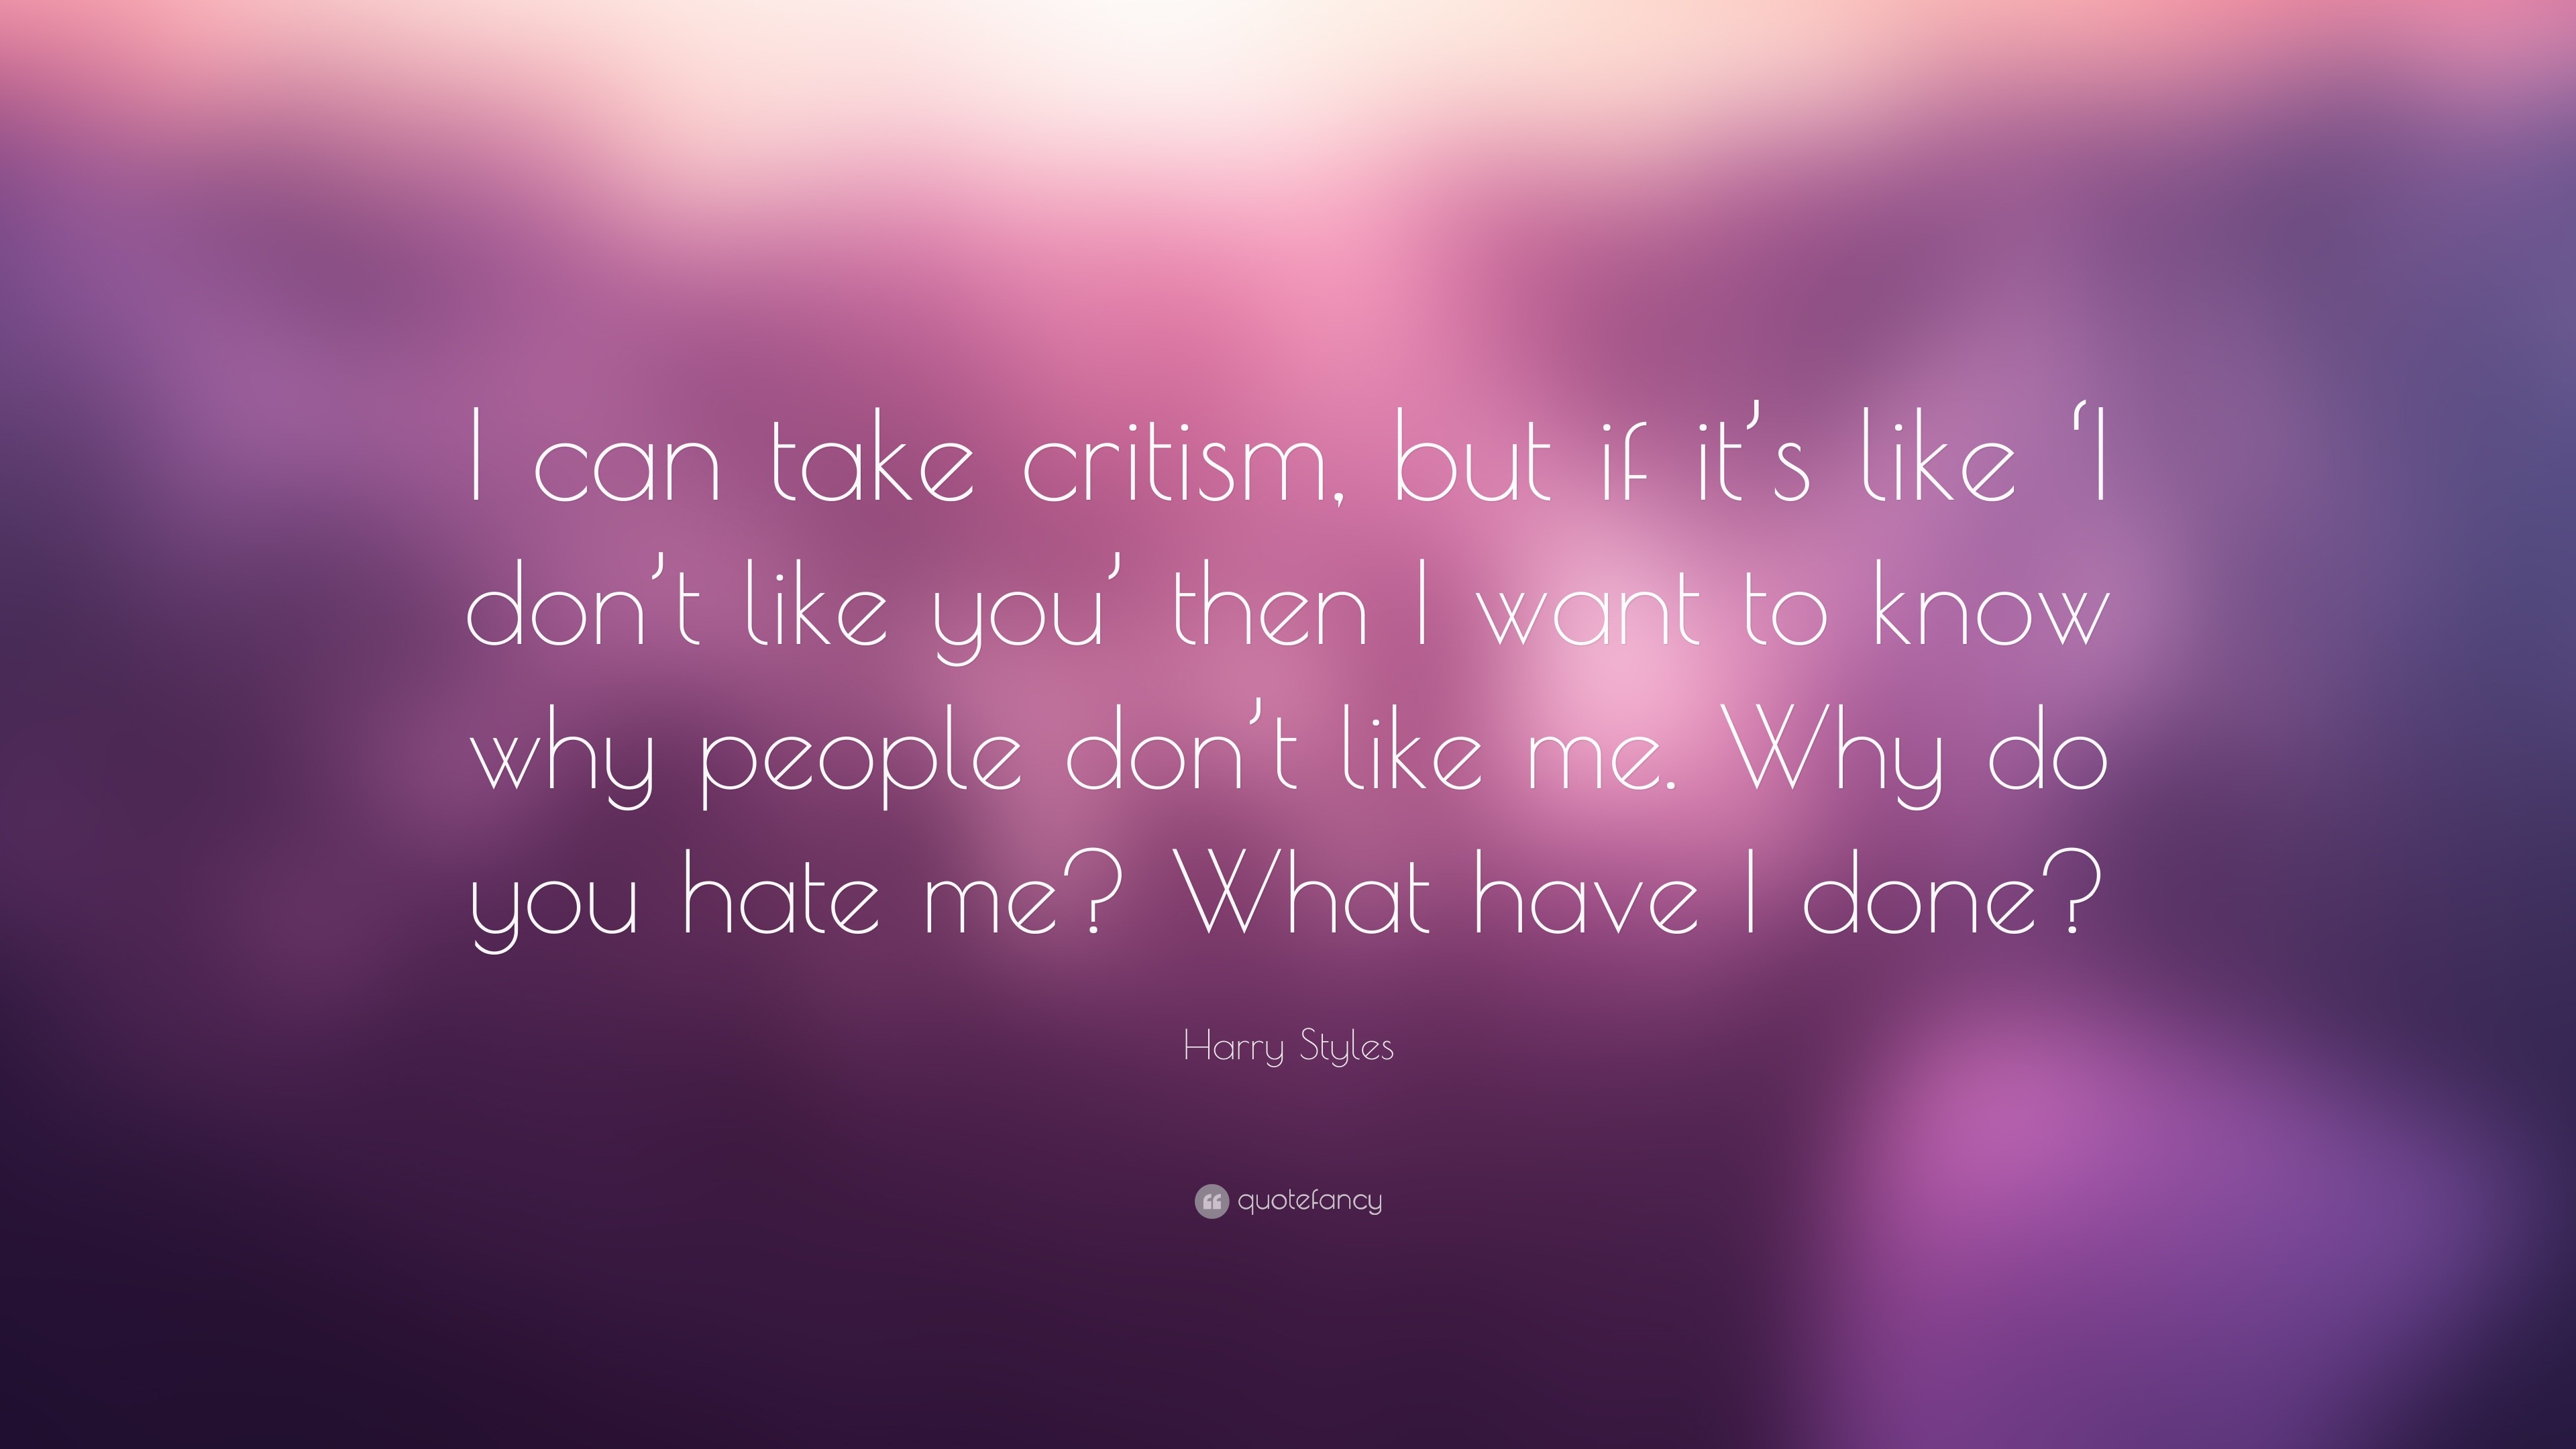 Harry Styles Quote “I can take critism but if it s like I